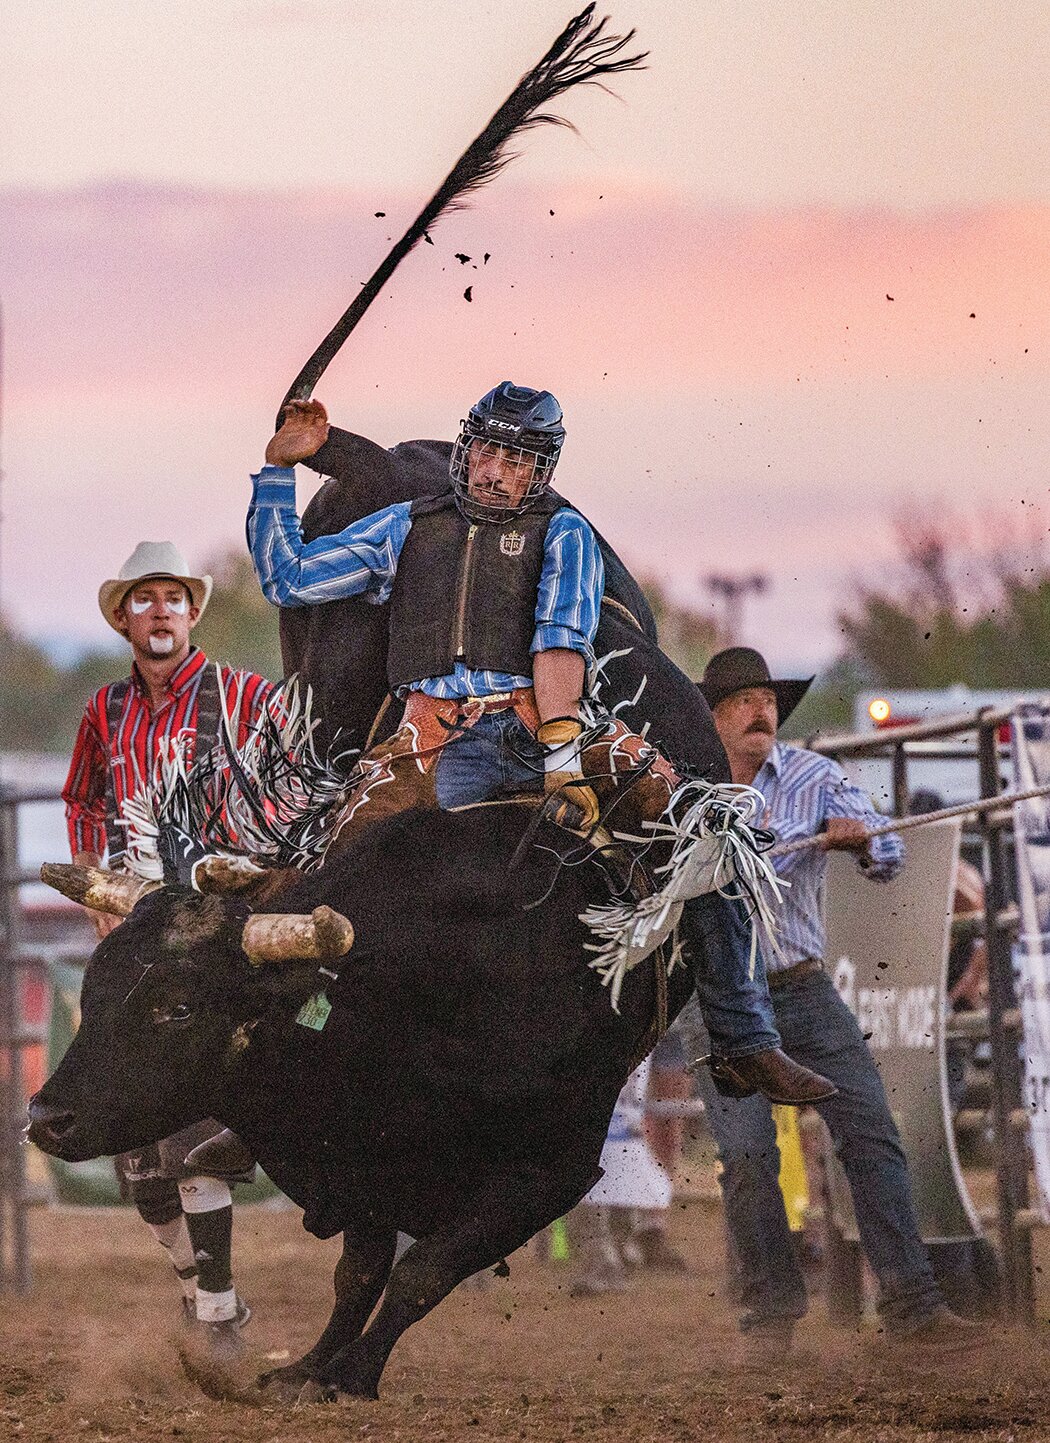 Benjamin Viveros, of Yelm, hangs on to “Flatliner” the bull during night one of rodeo events at the Southwest Washington Fair on Wednesday, Aug. 16.